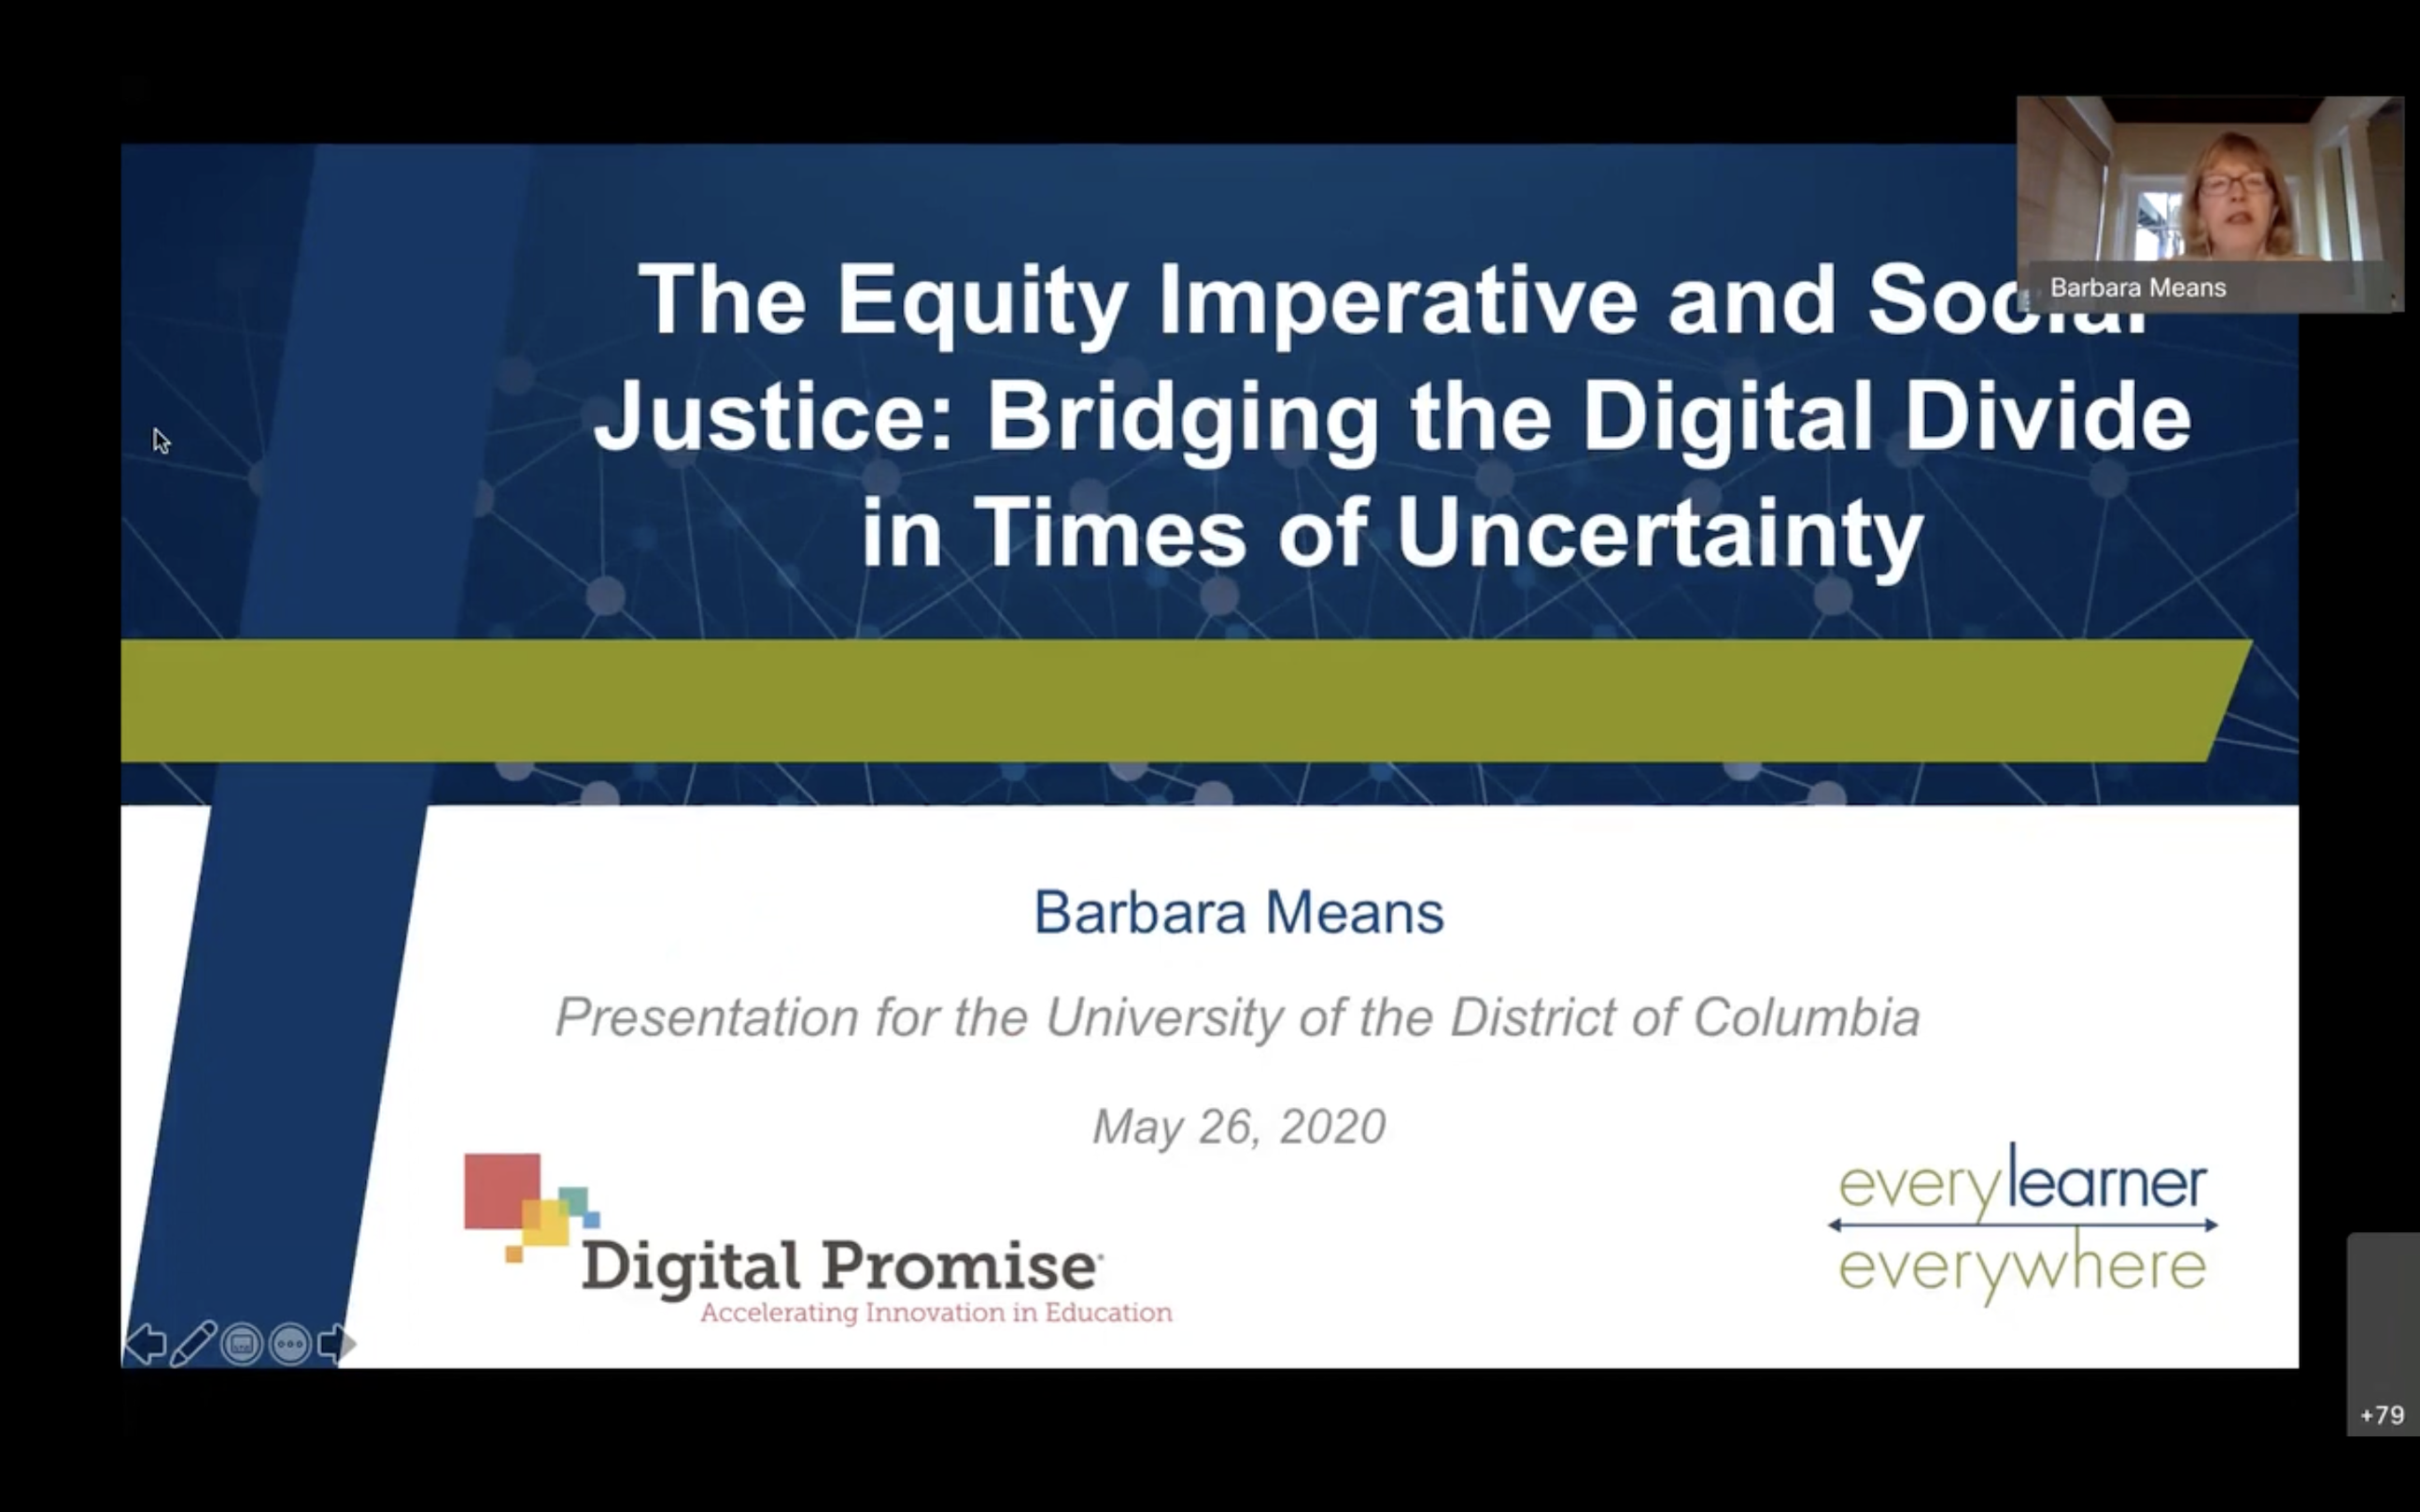 The Equity Imperative and Social Justice thumbnail